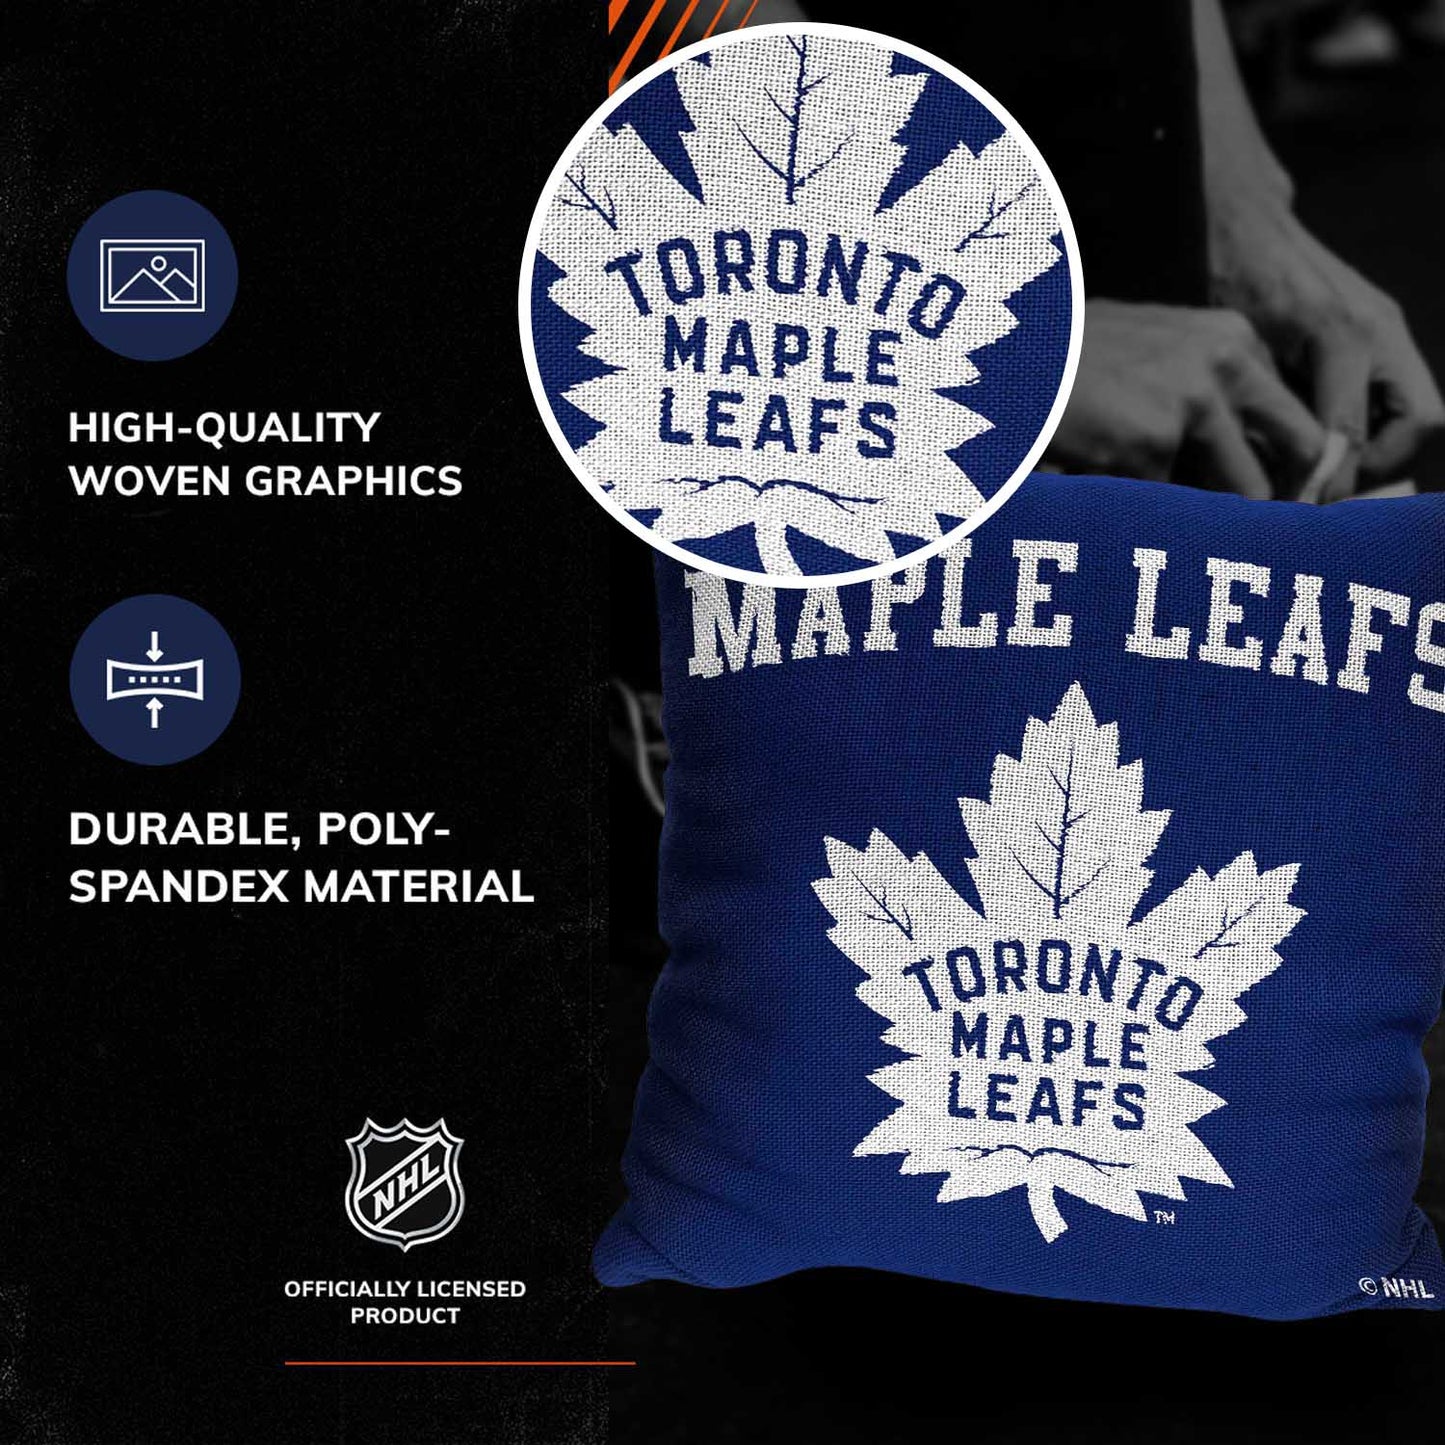 Toronto Maple Leafs NHL Decorative Pillows- Enhance Your Space with Woven Throw Pillows - Blue